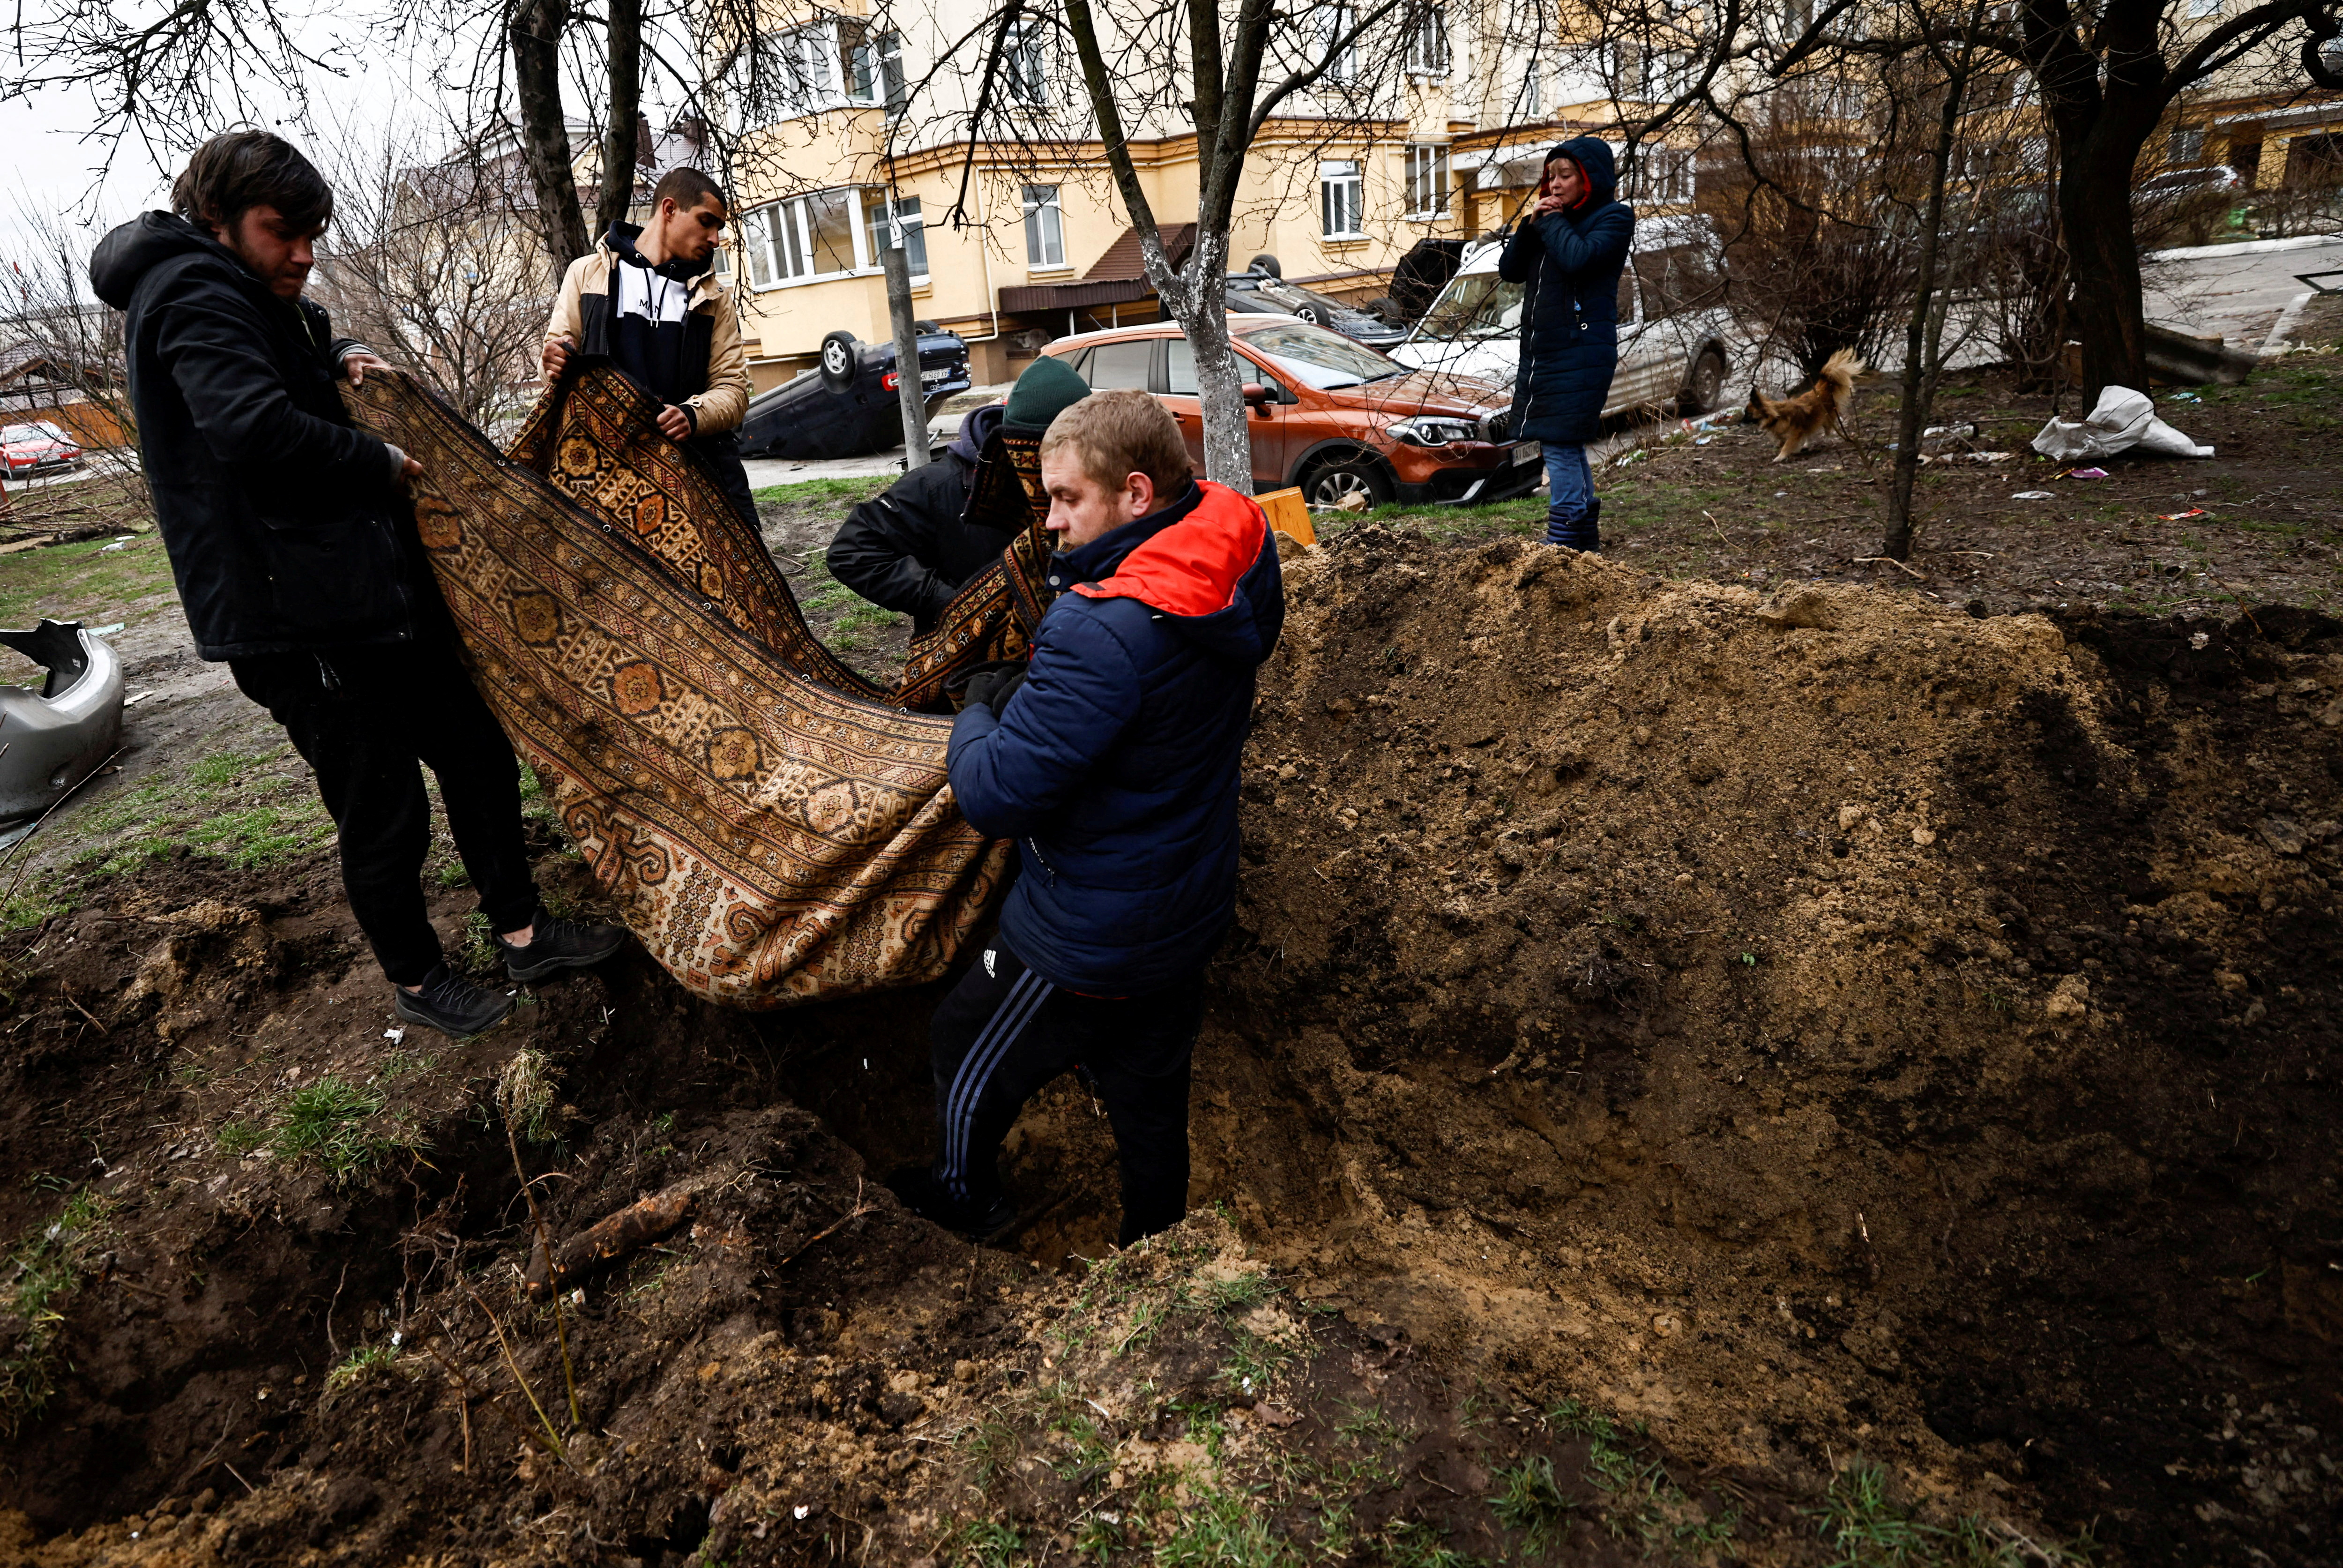 Serhii Lahovskyi and other residents carry the body of Ihor Lytvynenko, who according to residents was killed by Russian Soldiers to bury him, in Bucha